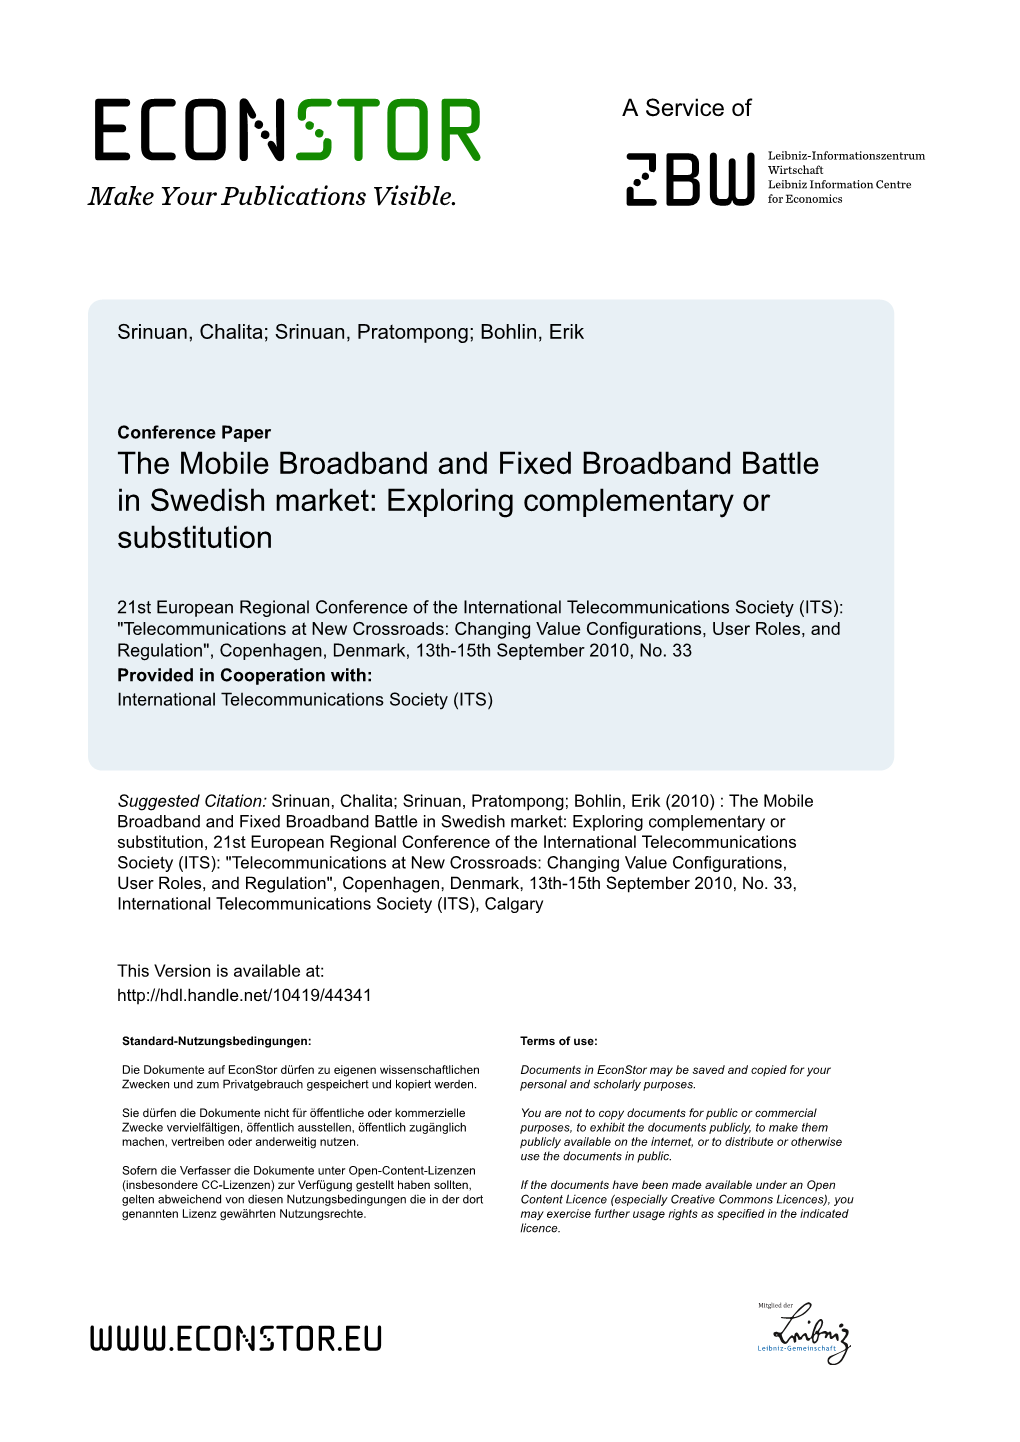 The Mobile Broadband and Fixed Broadband Battle in Swedish Market: Exploring Complementary Or Substitution